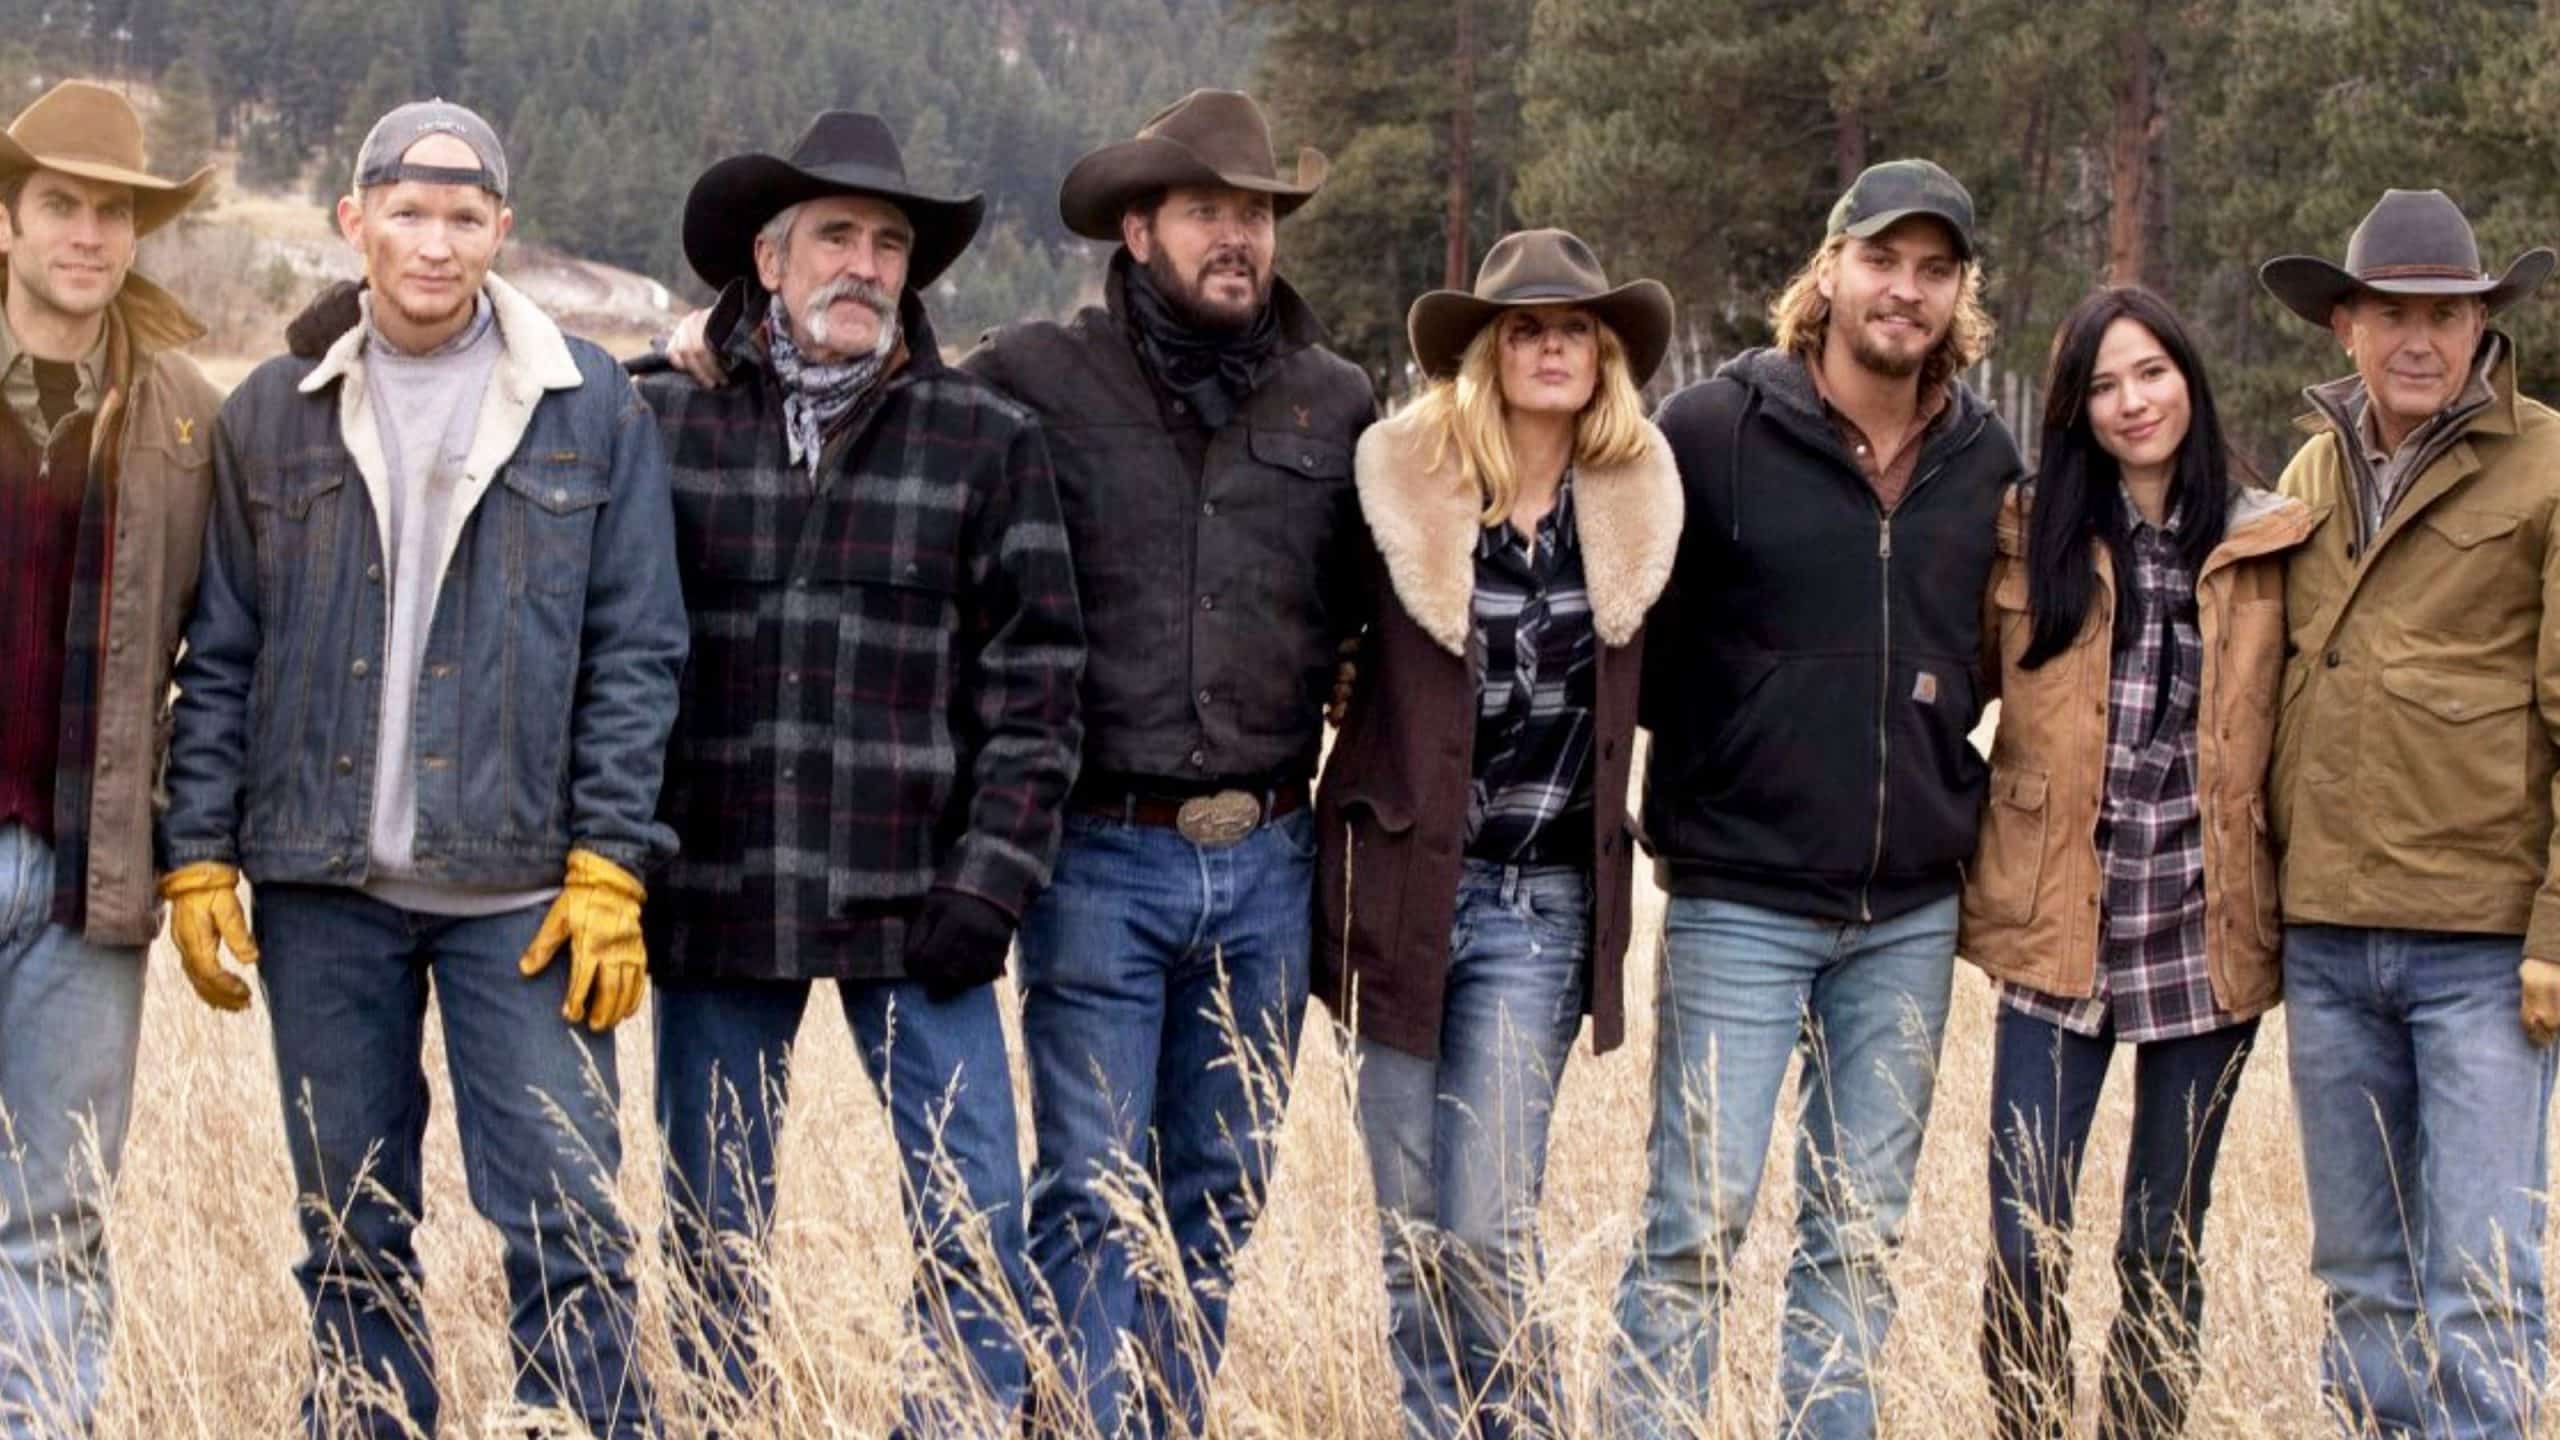 "Yellowstone" Star Shows Off Singing Skills In Latest Instagram Post